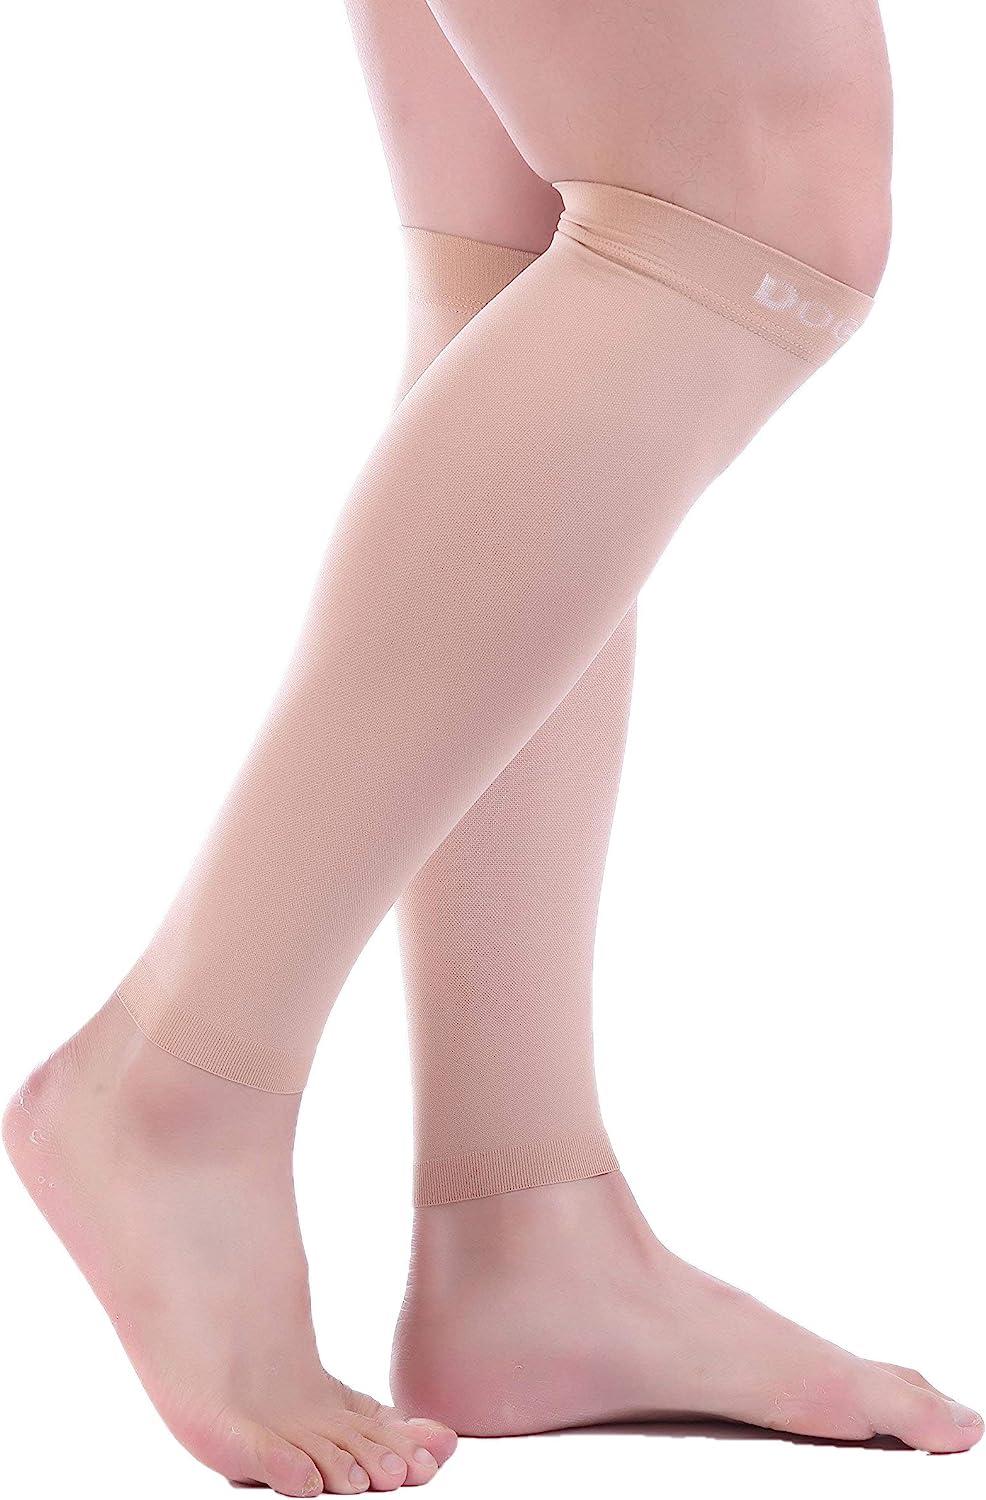 Thigh Compression Sleeves SKIN/NUDE by Doc Miller